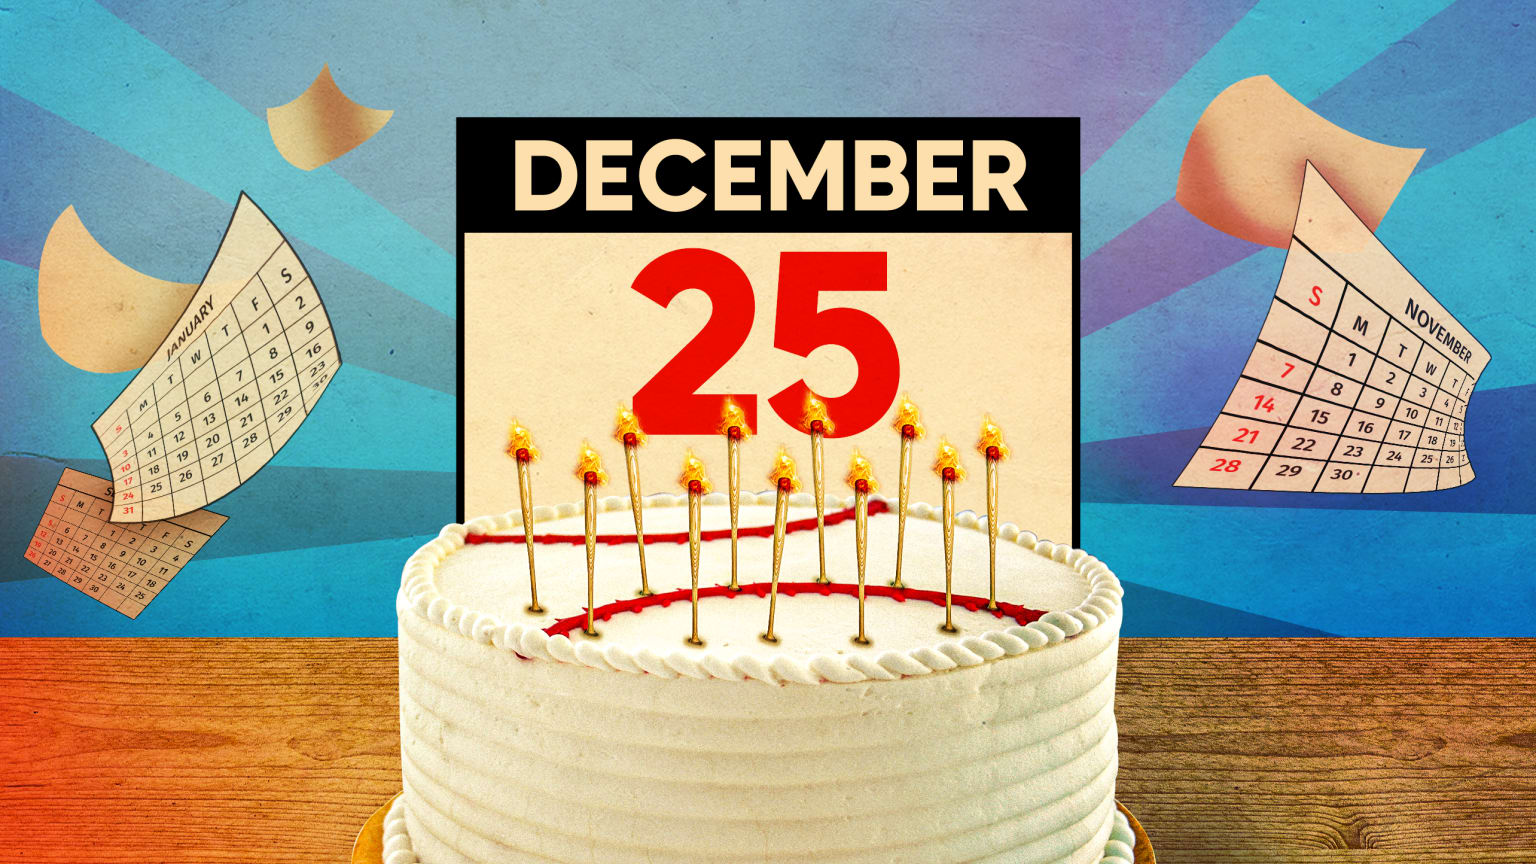 A birthday cake with a calendar showing December 25 on top of it